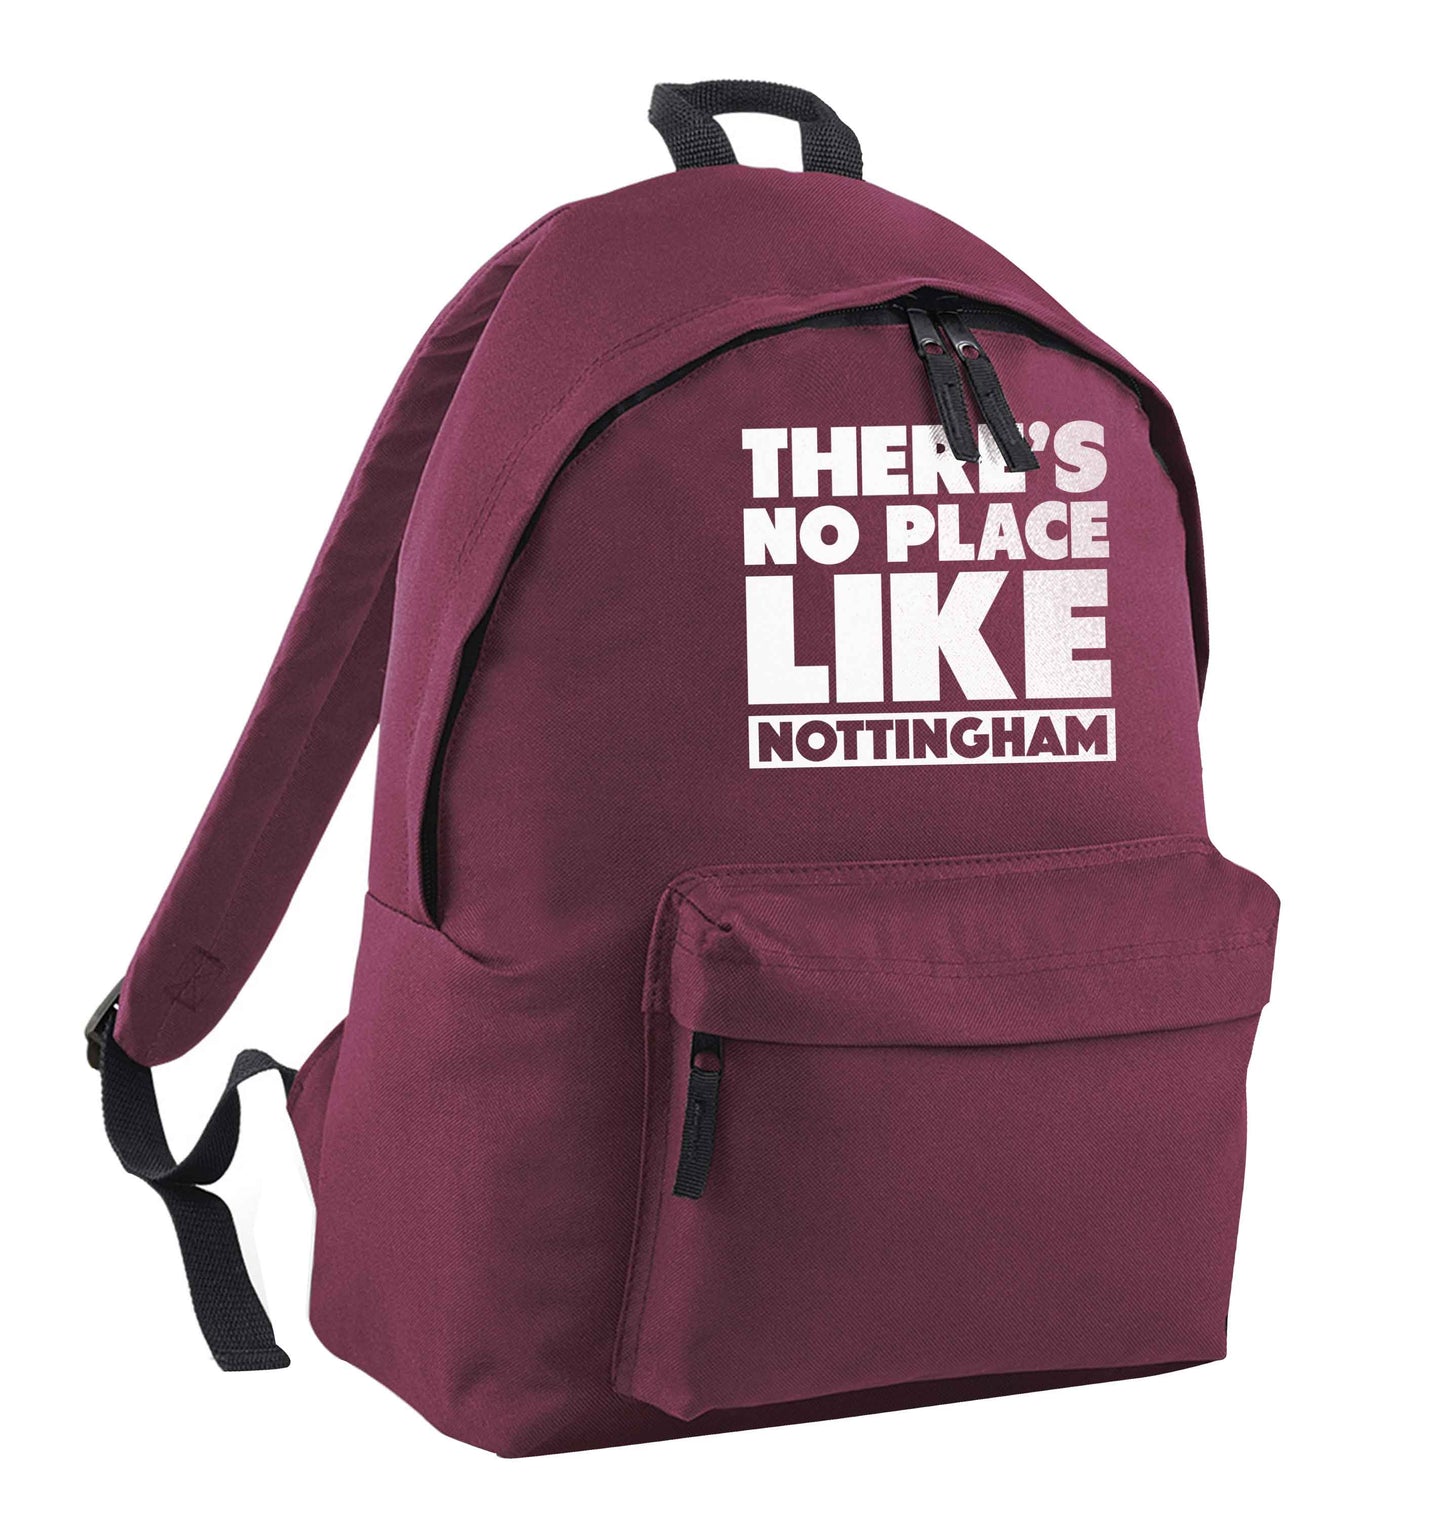 There's no place like Nottingham maroon adults backpack